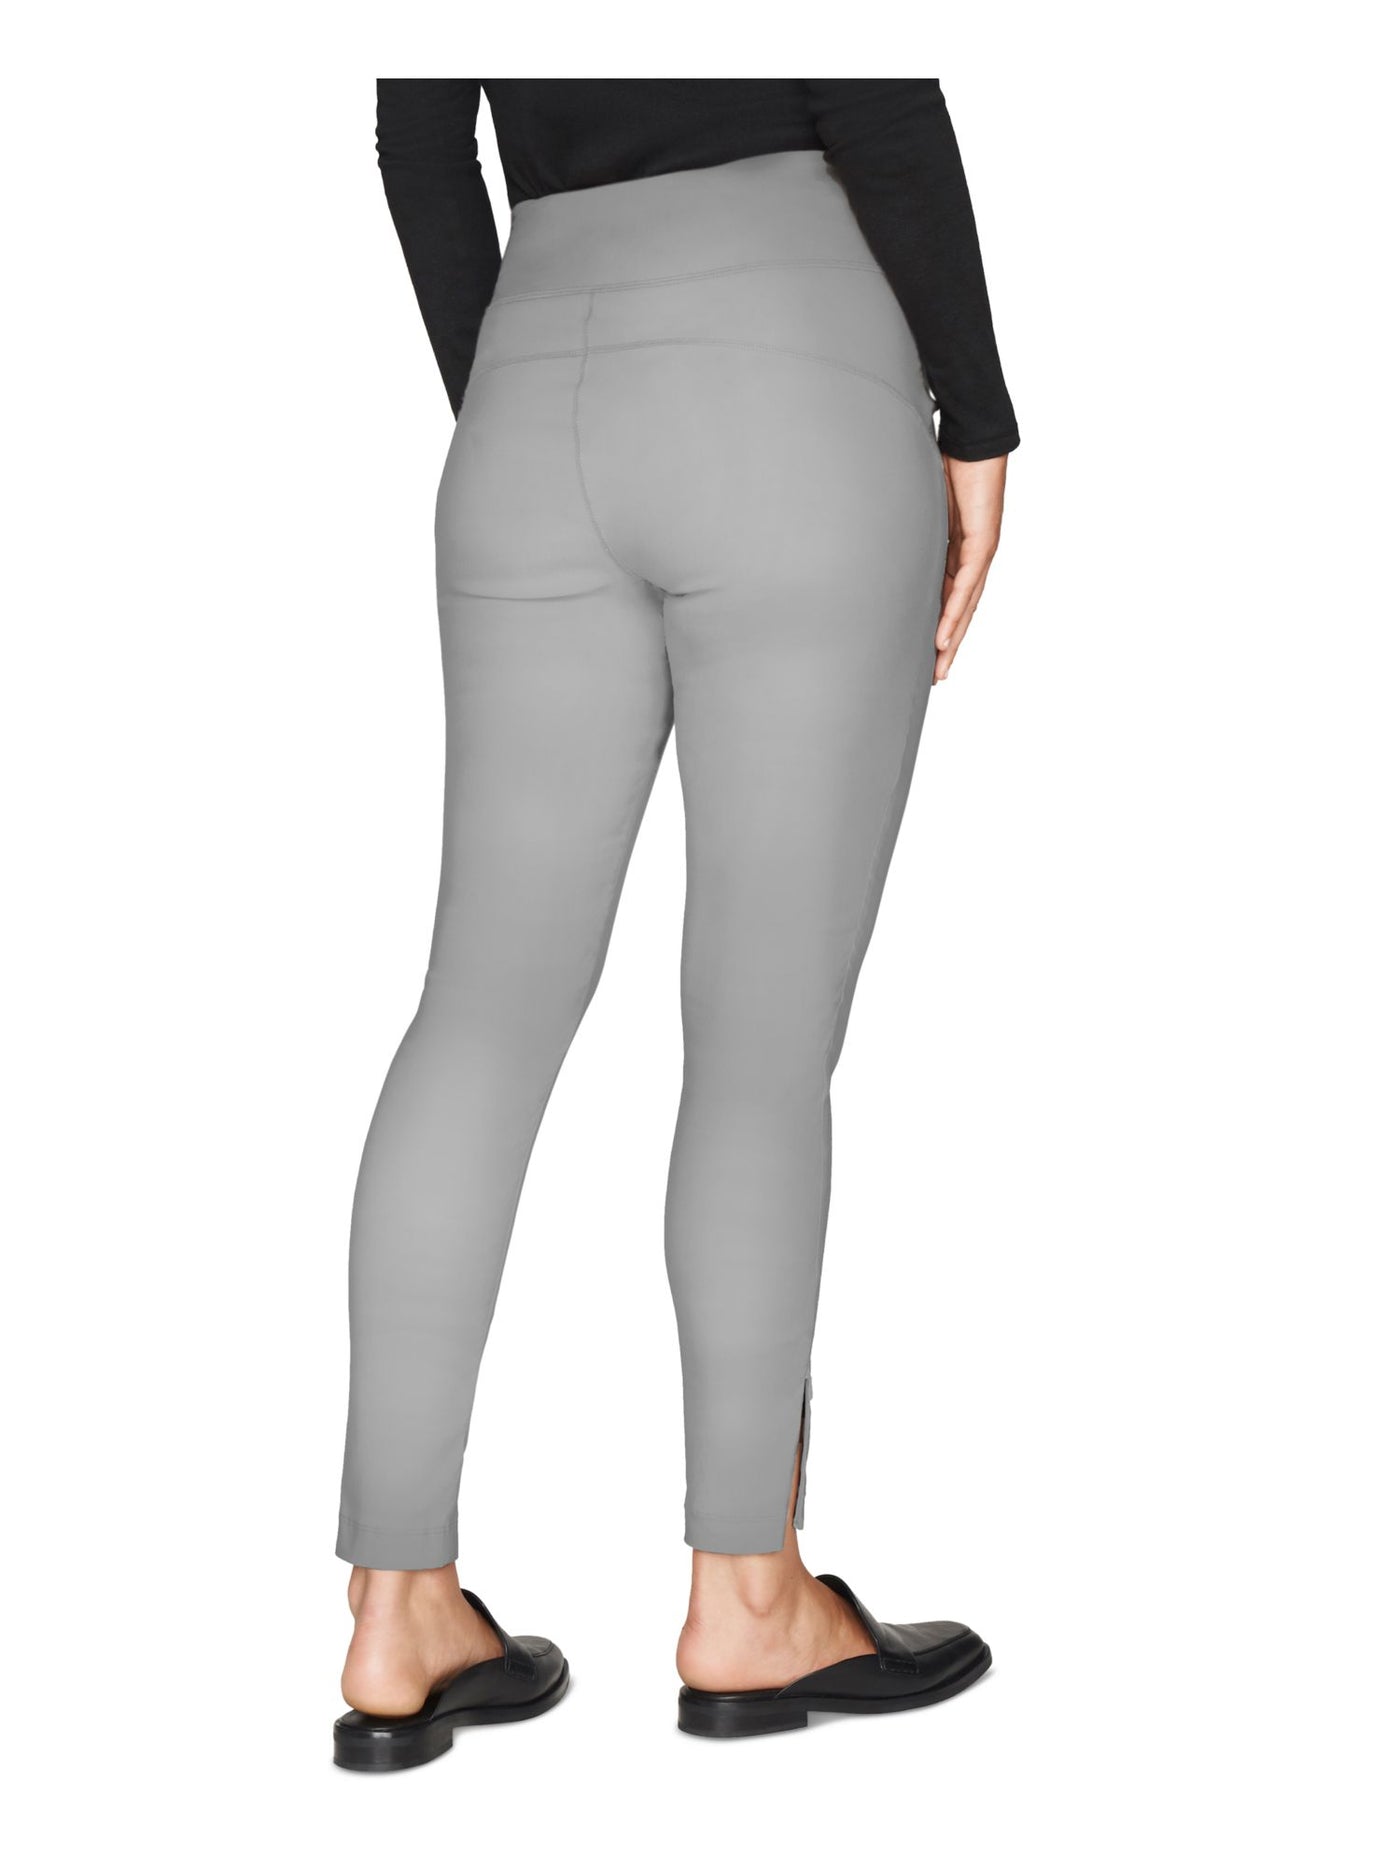 NEW YORK Womens Zippered Pocketed Recycled Wear To Work Leggings